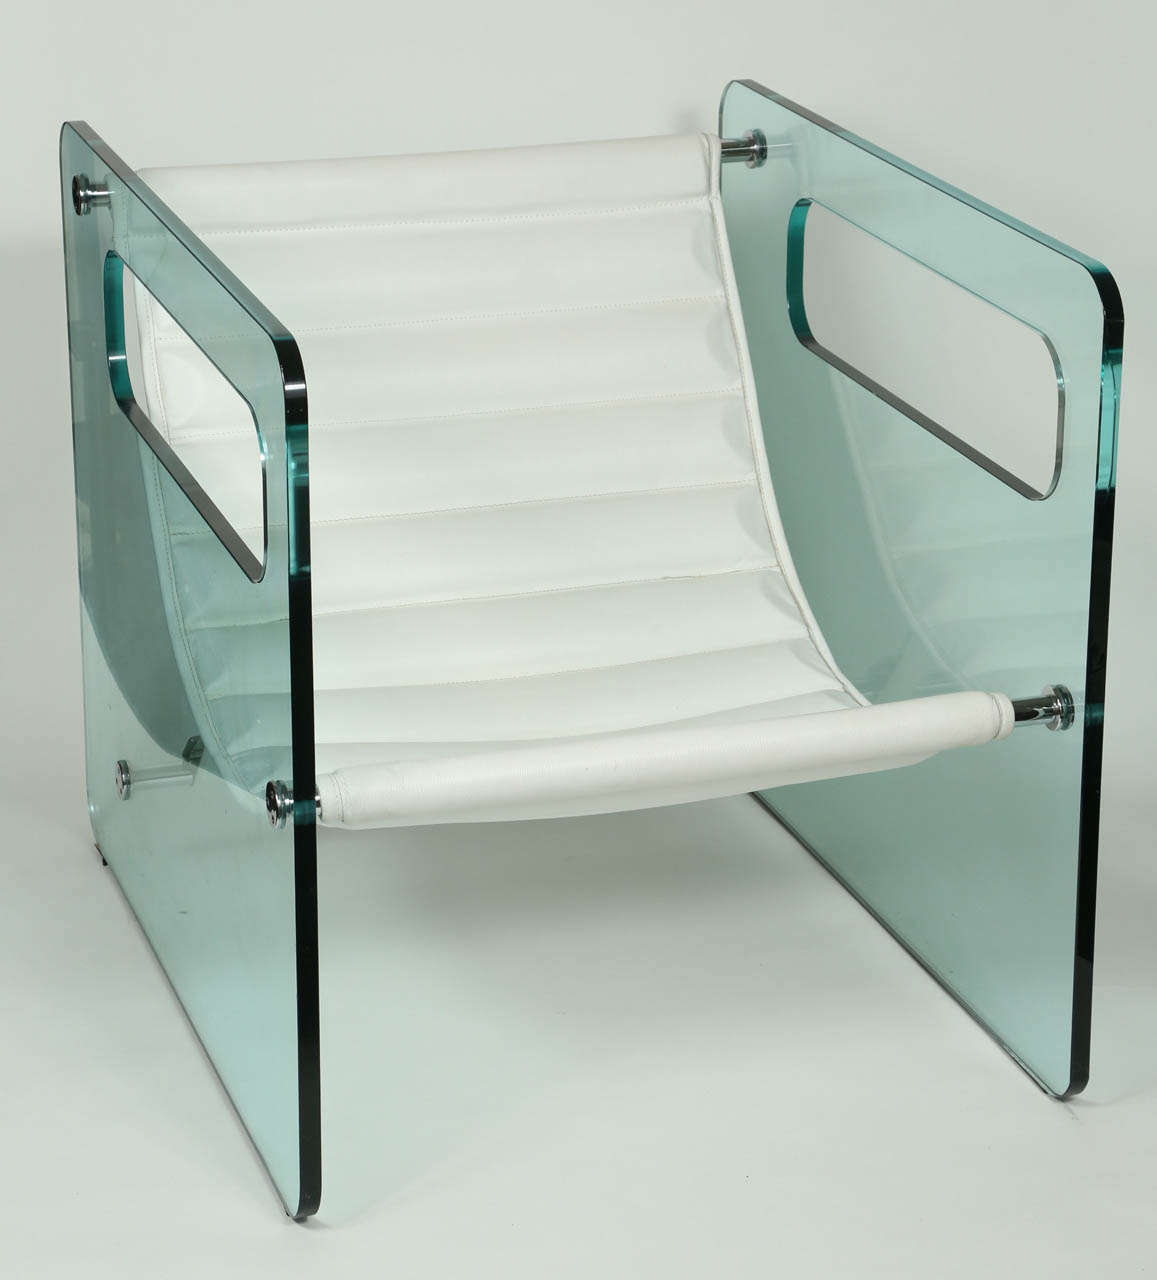 China white leather seat with 3/4 inch glass frame supported by stainless steel support rods.